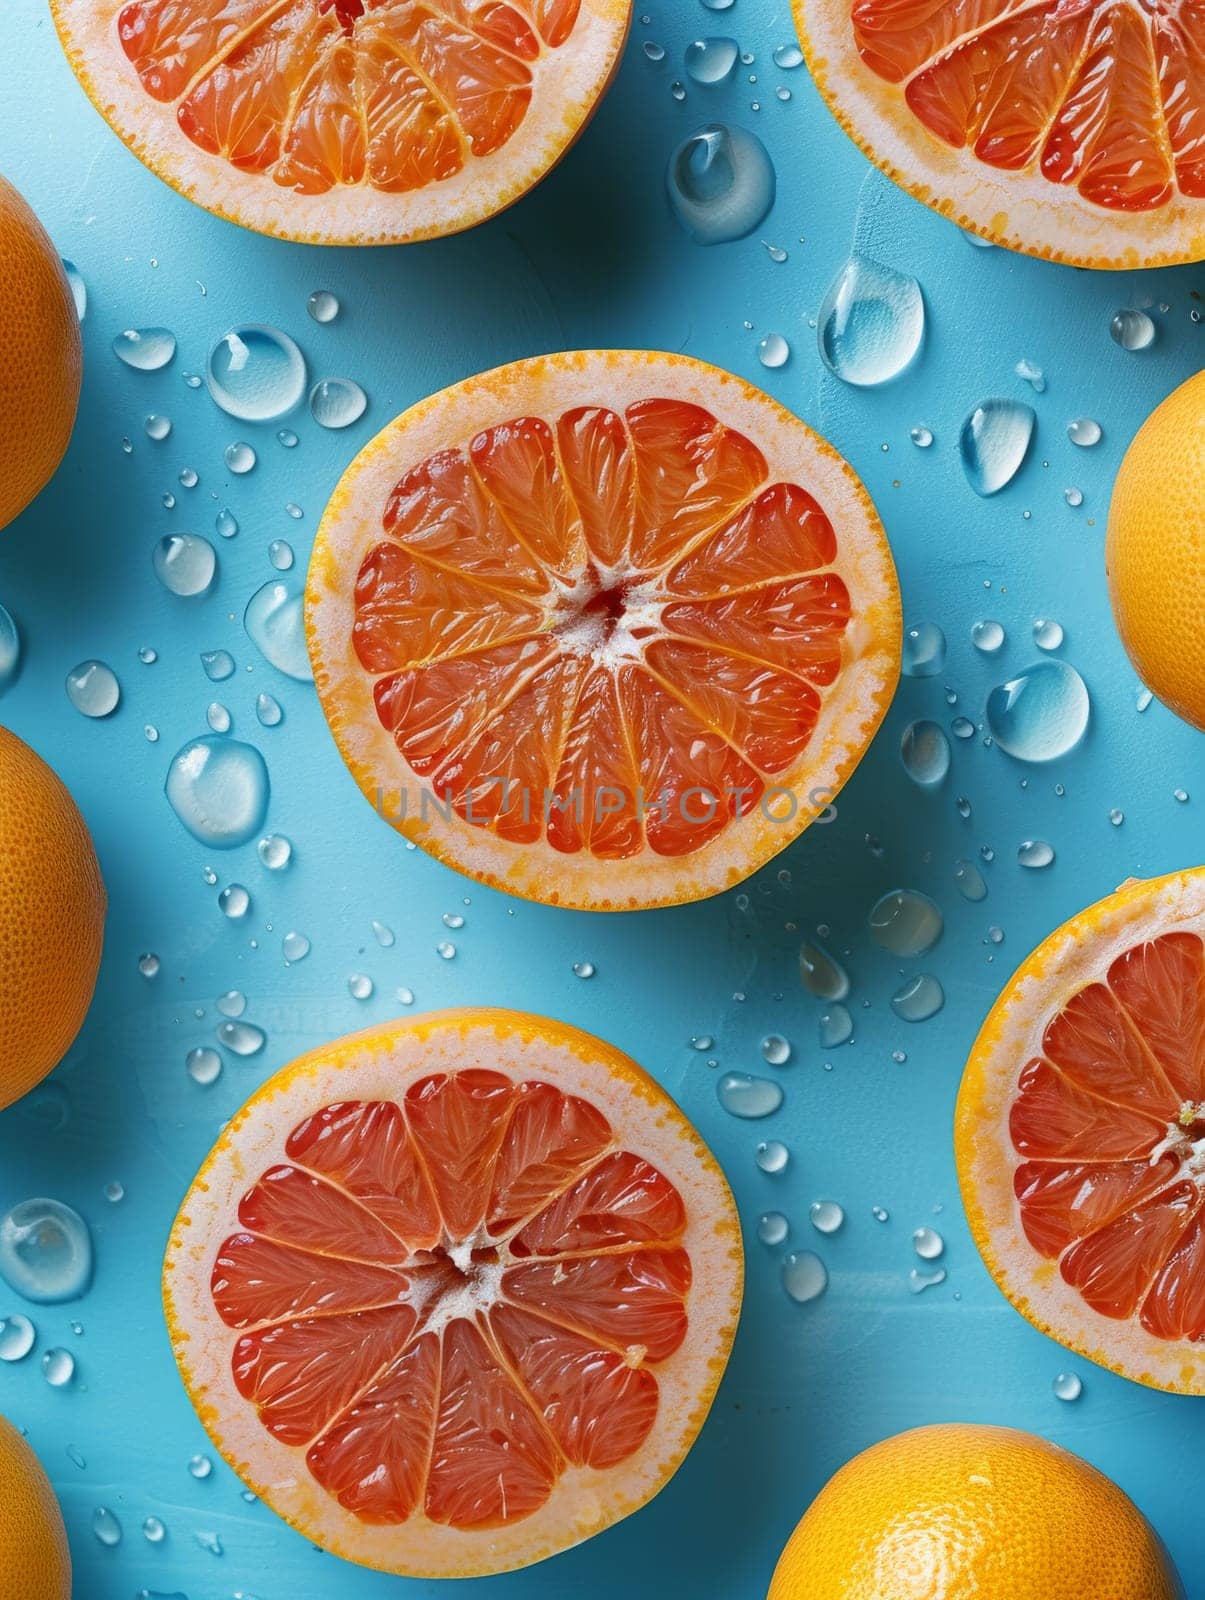 A close up of a bunch of oranges with one of them cut in half. The oranges are arranged in a pattern on a blue and white tablecloth